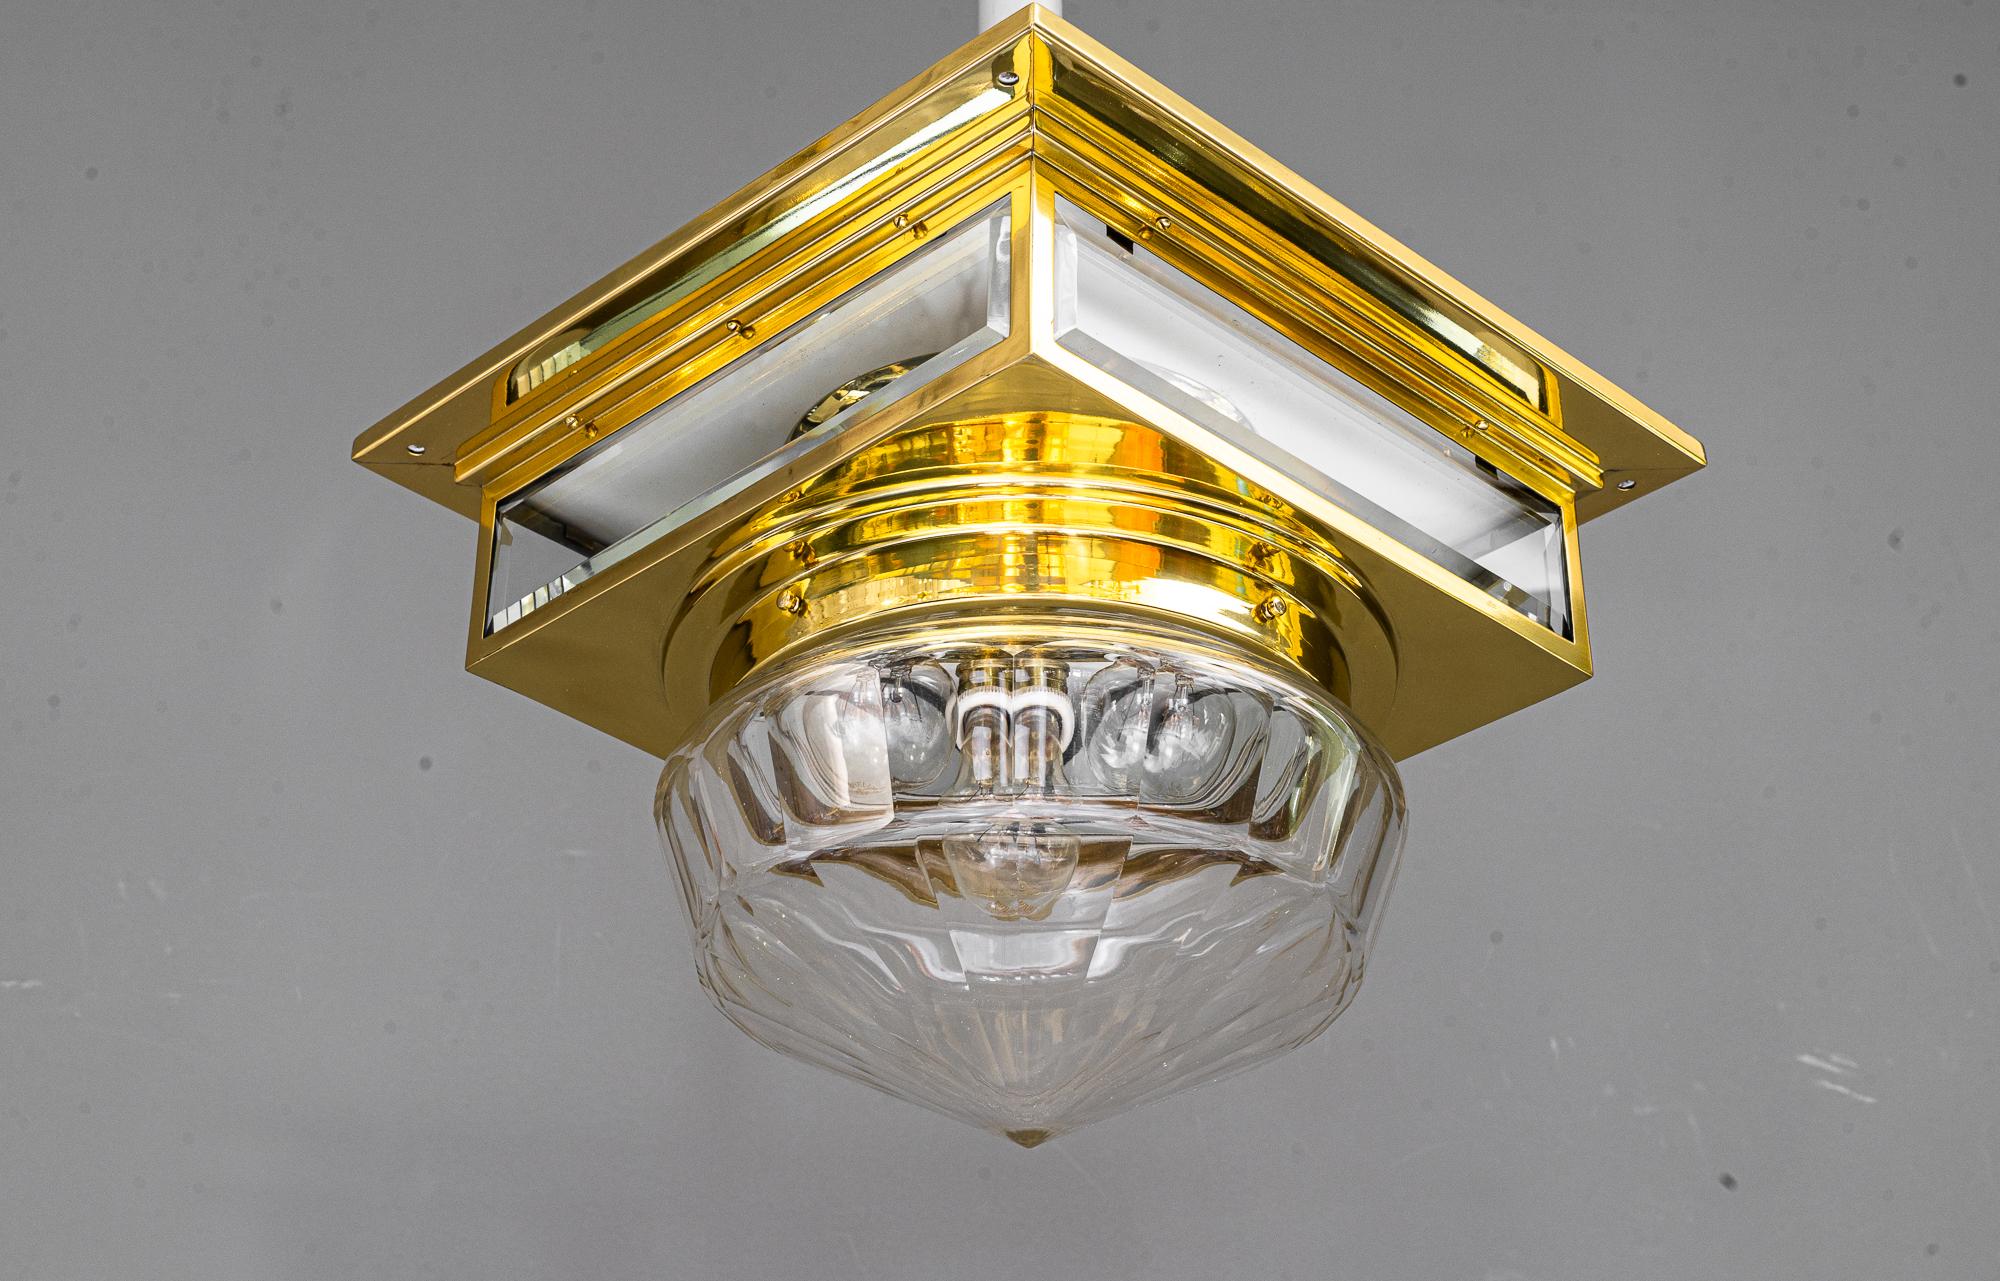 Art Deco ceiling lamp with an hight quality glass shade around 1920s
Polished and stove enamelled
original glass shade